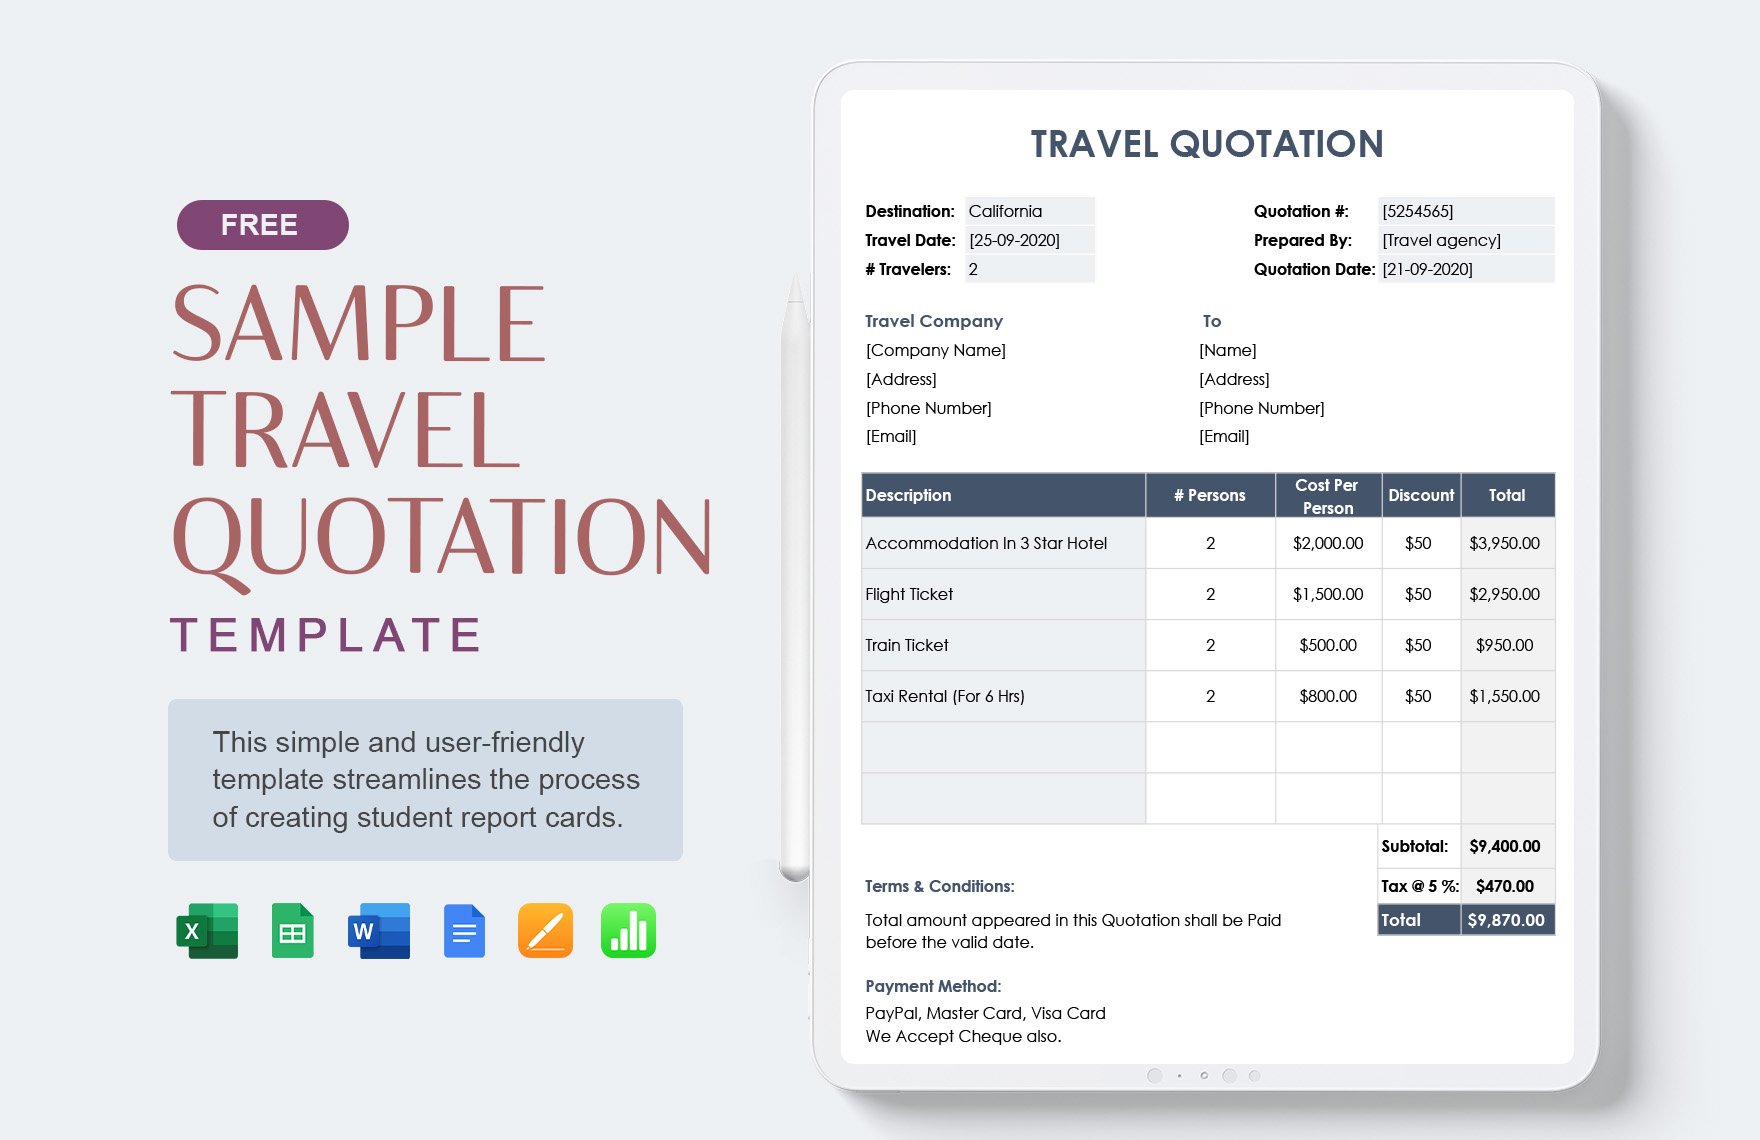 Sample Travel Quotation Template